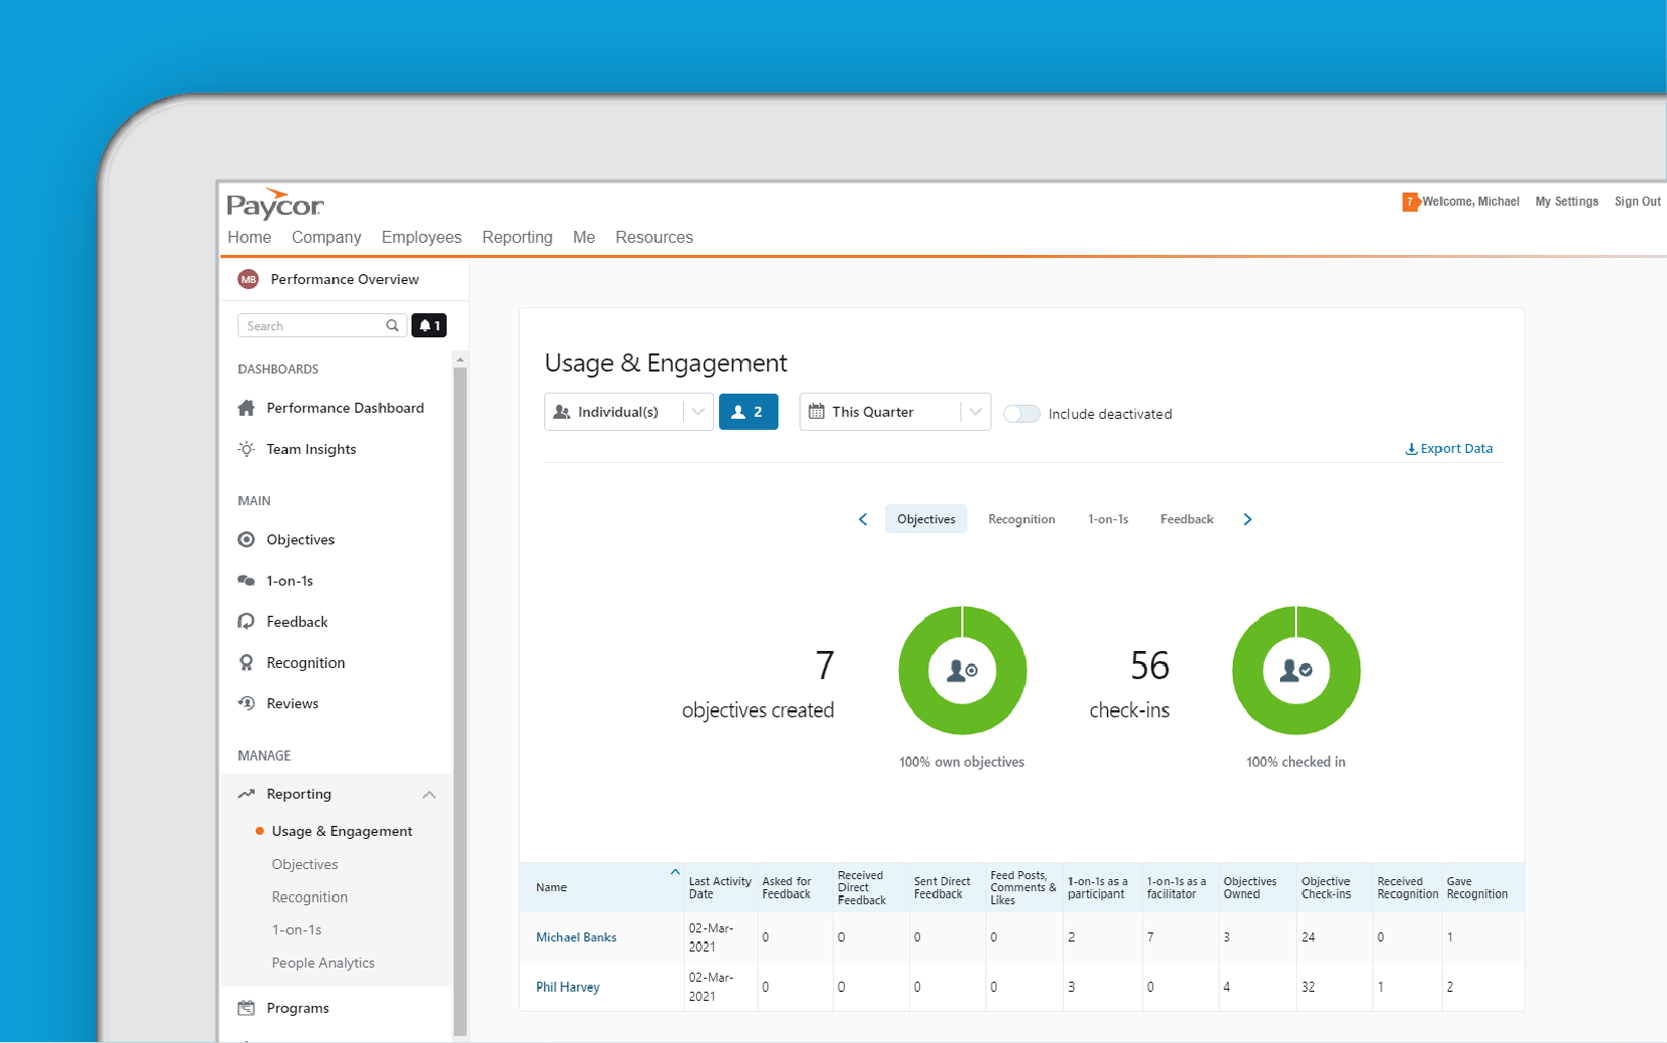 Corner of tablet showing Paycor employee usage and engagement dashboard against blue background